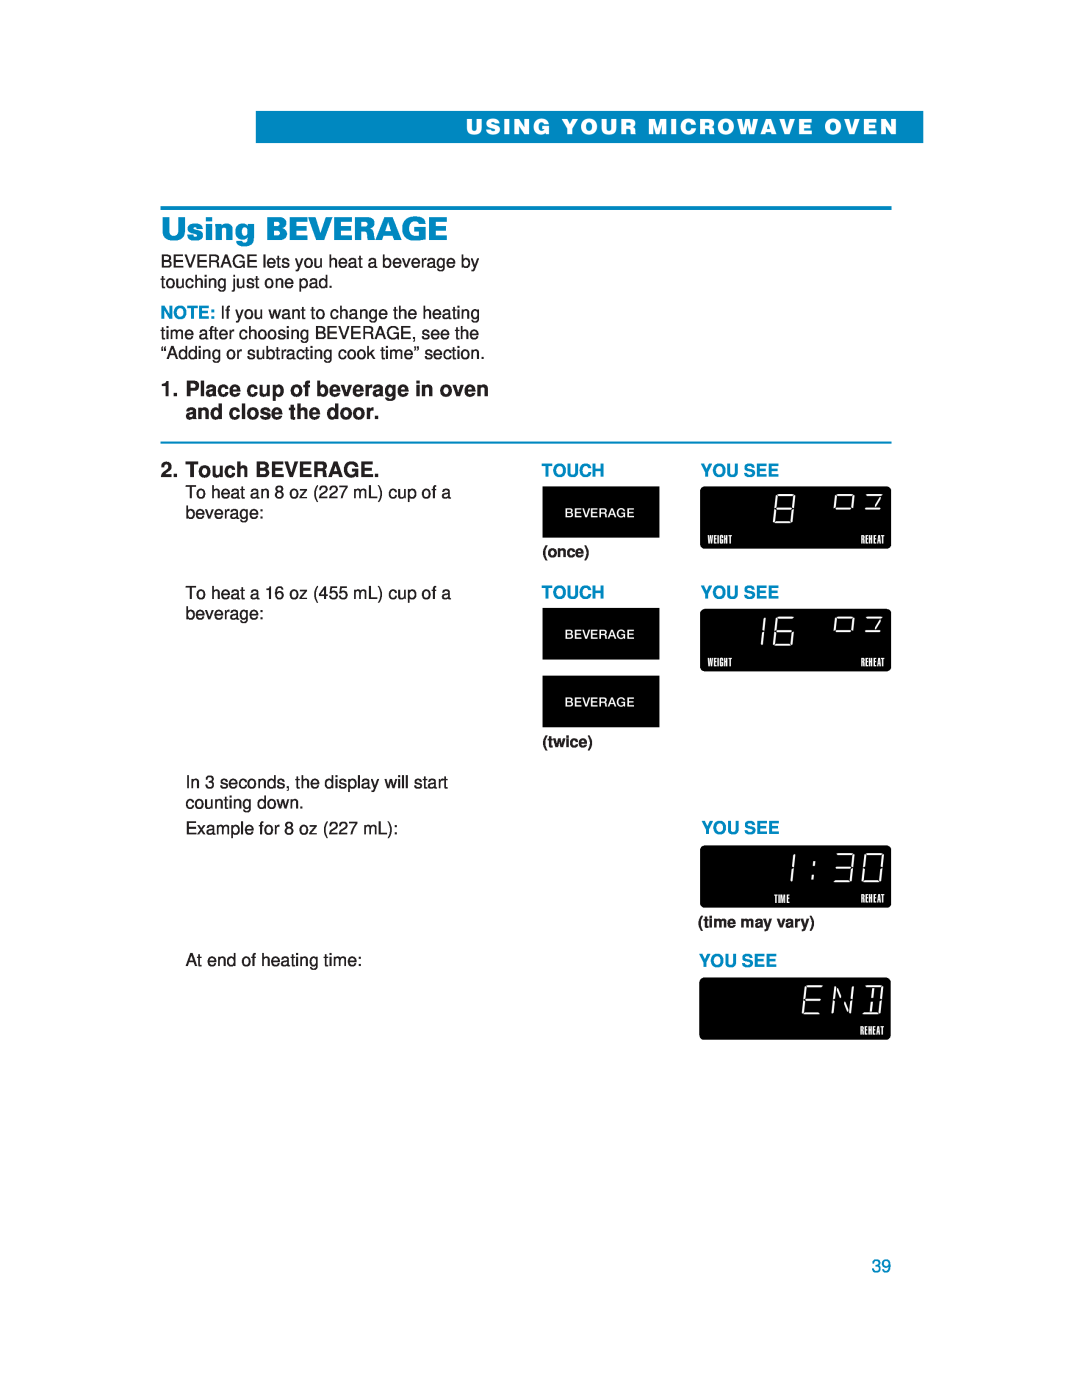 Whirlpool YMH6130XE warranty Using BEVERAGE, Place cup of beverage in oven and close the door, Touch BEVERAGE 